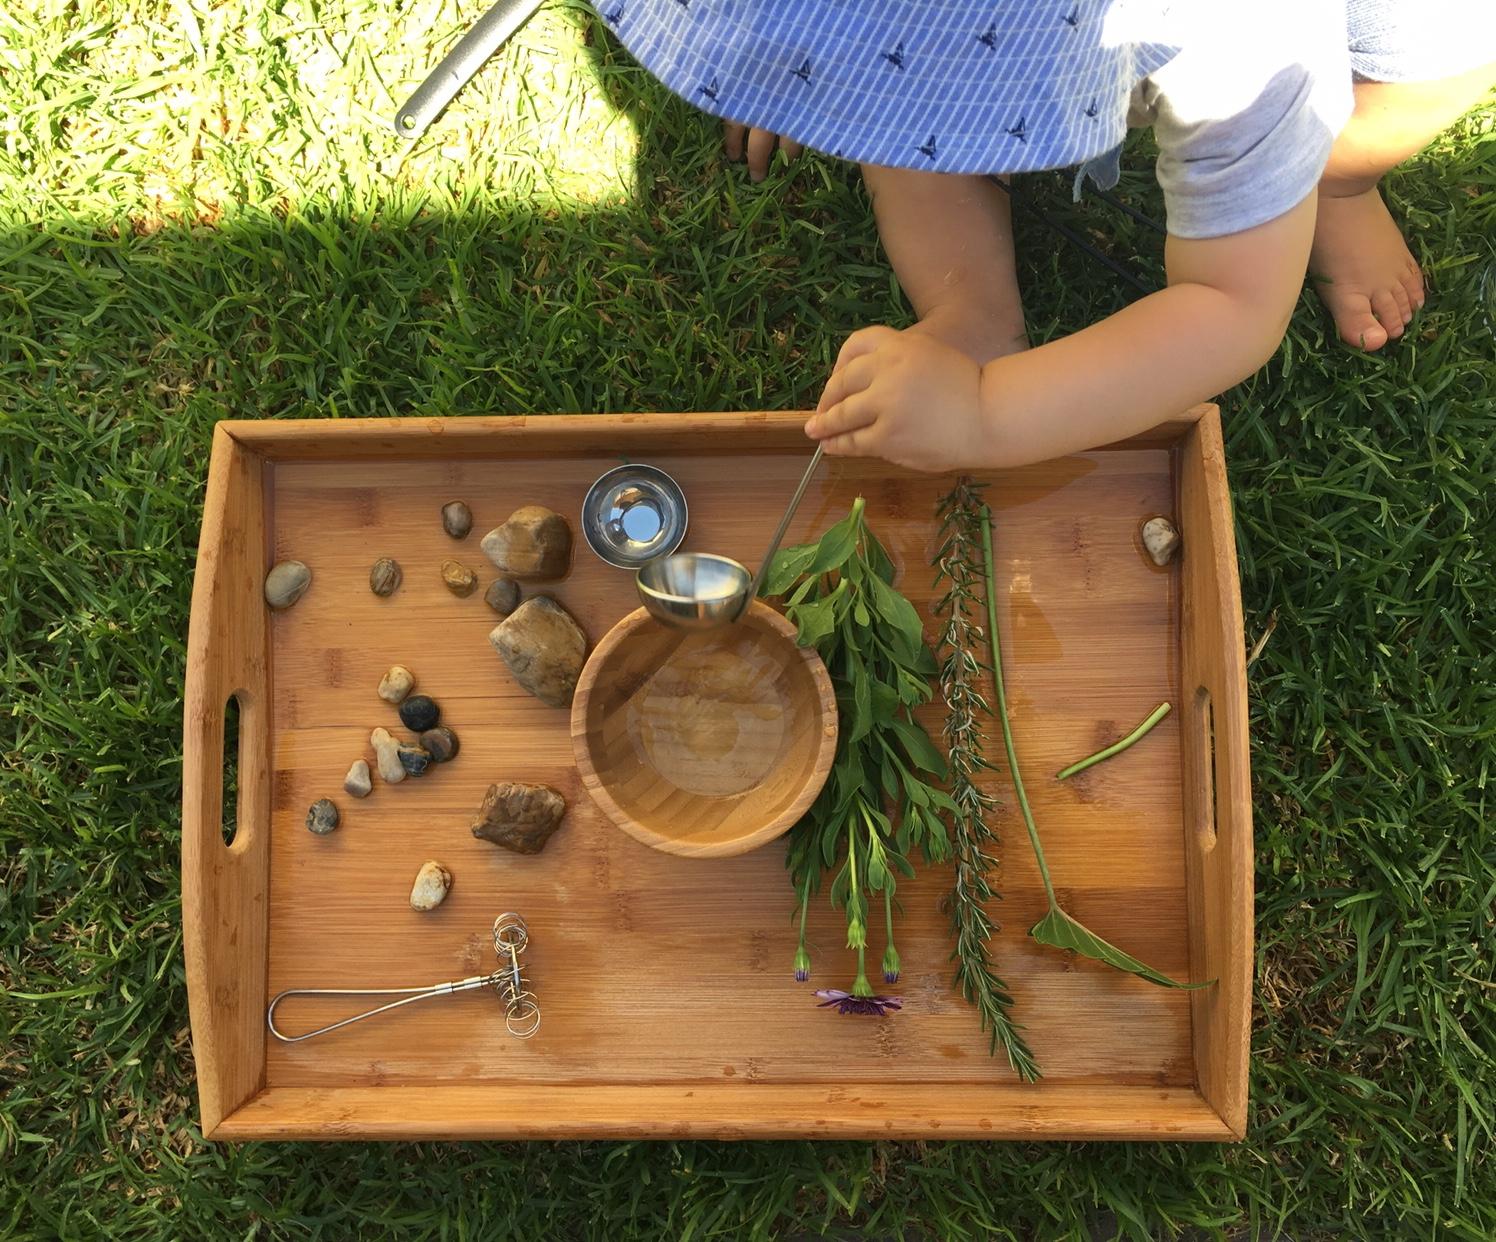 Wild Tots Nature Play for 1- 4 year olds - Fun with Nature - Plant 4 Bowden